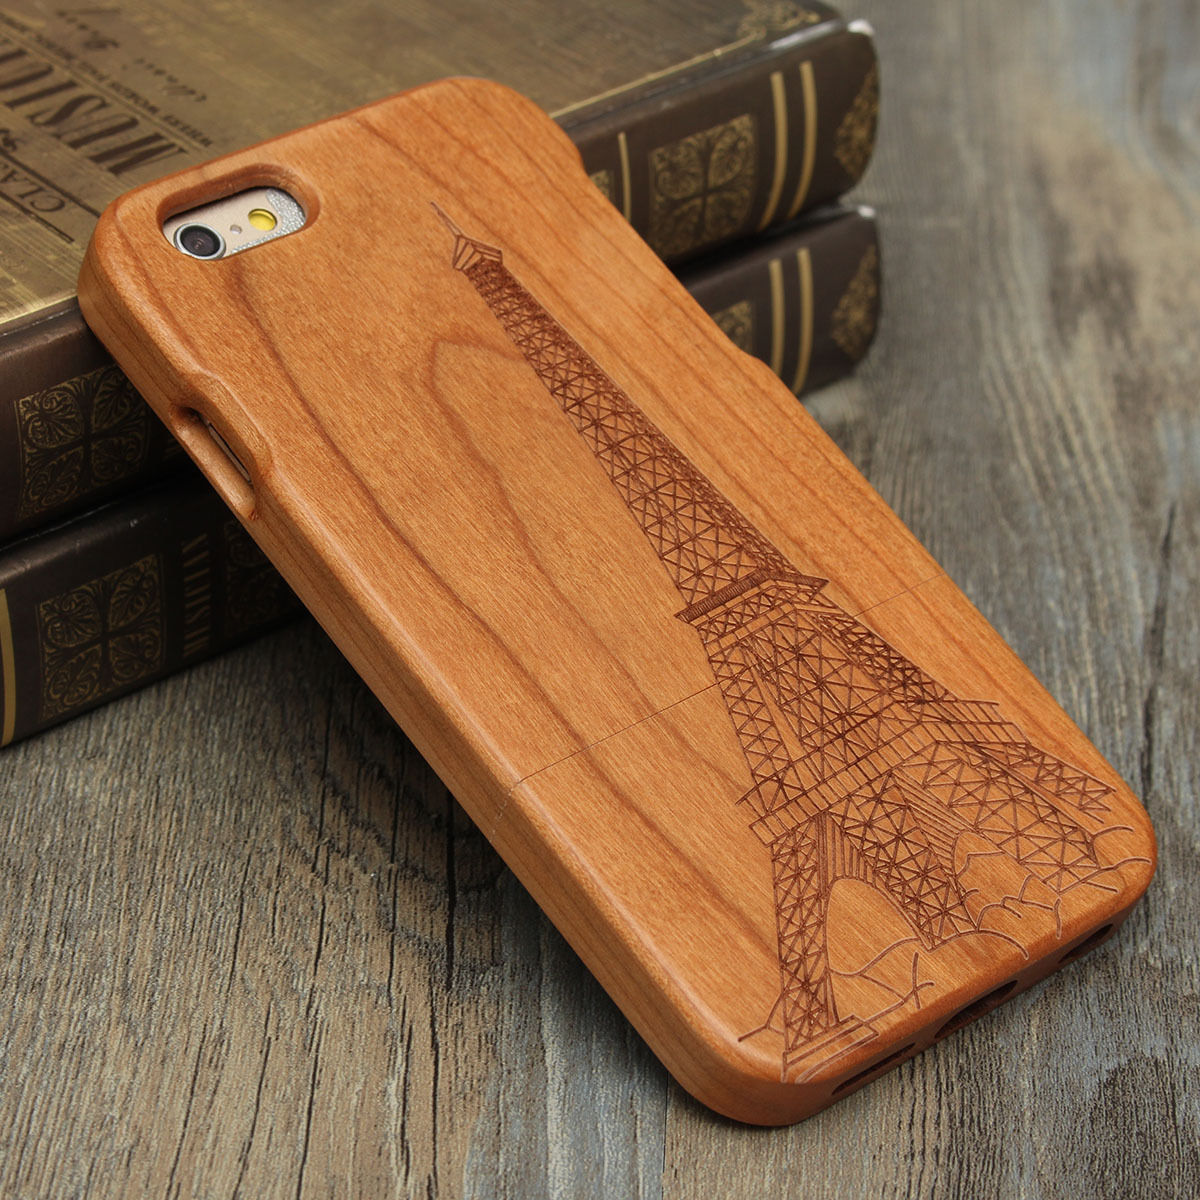 Luxury Natural Wood Wooden Bamboo Hard Cover Phone Case For Apple Iphone 6/6s/plus, Iron Tower